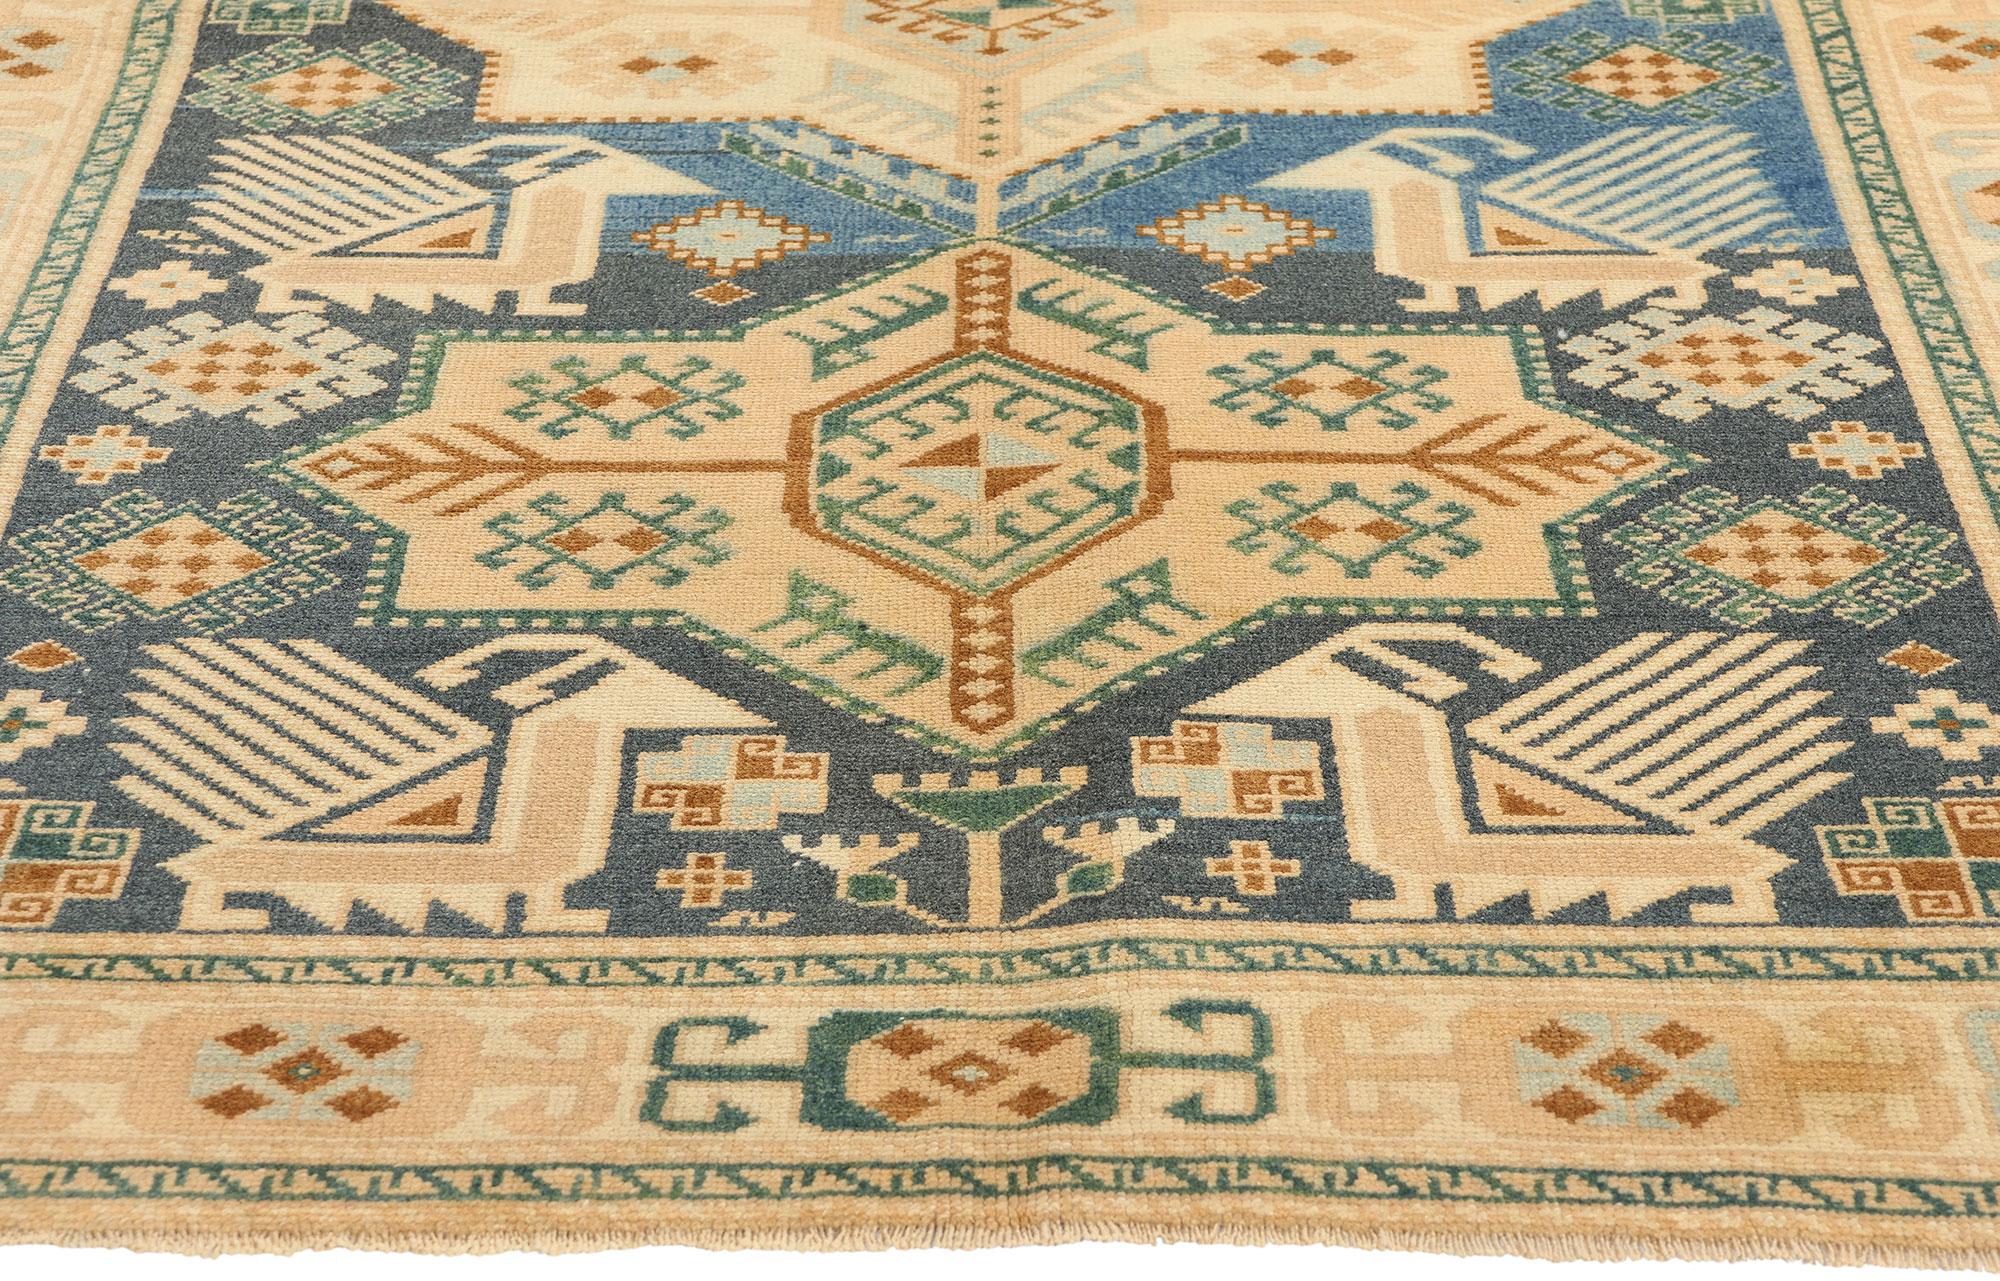 Vintage Blue Turkish Oushak Rug, Sophisticated Nomad Meets Masculine Boho In Good Condition For Sale In Dallas, TX